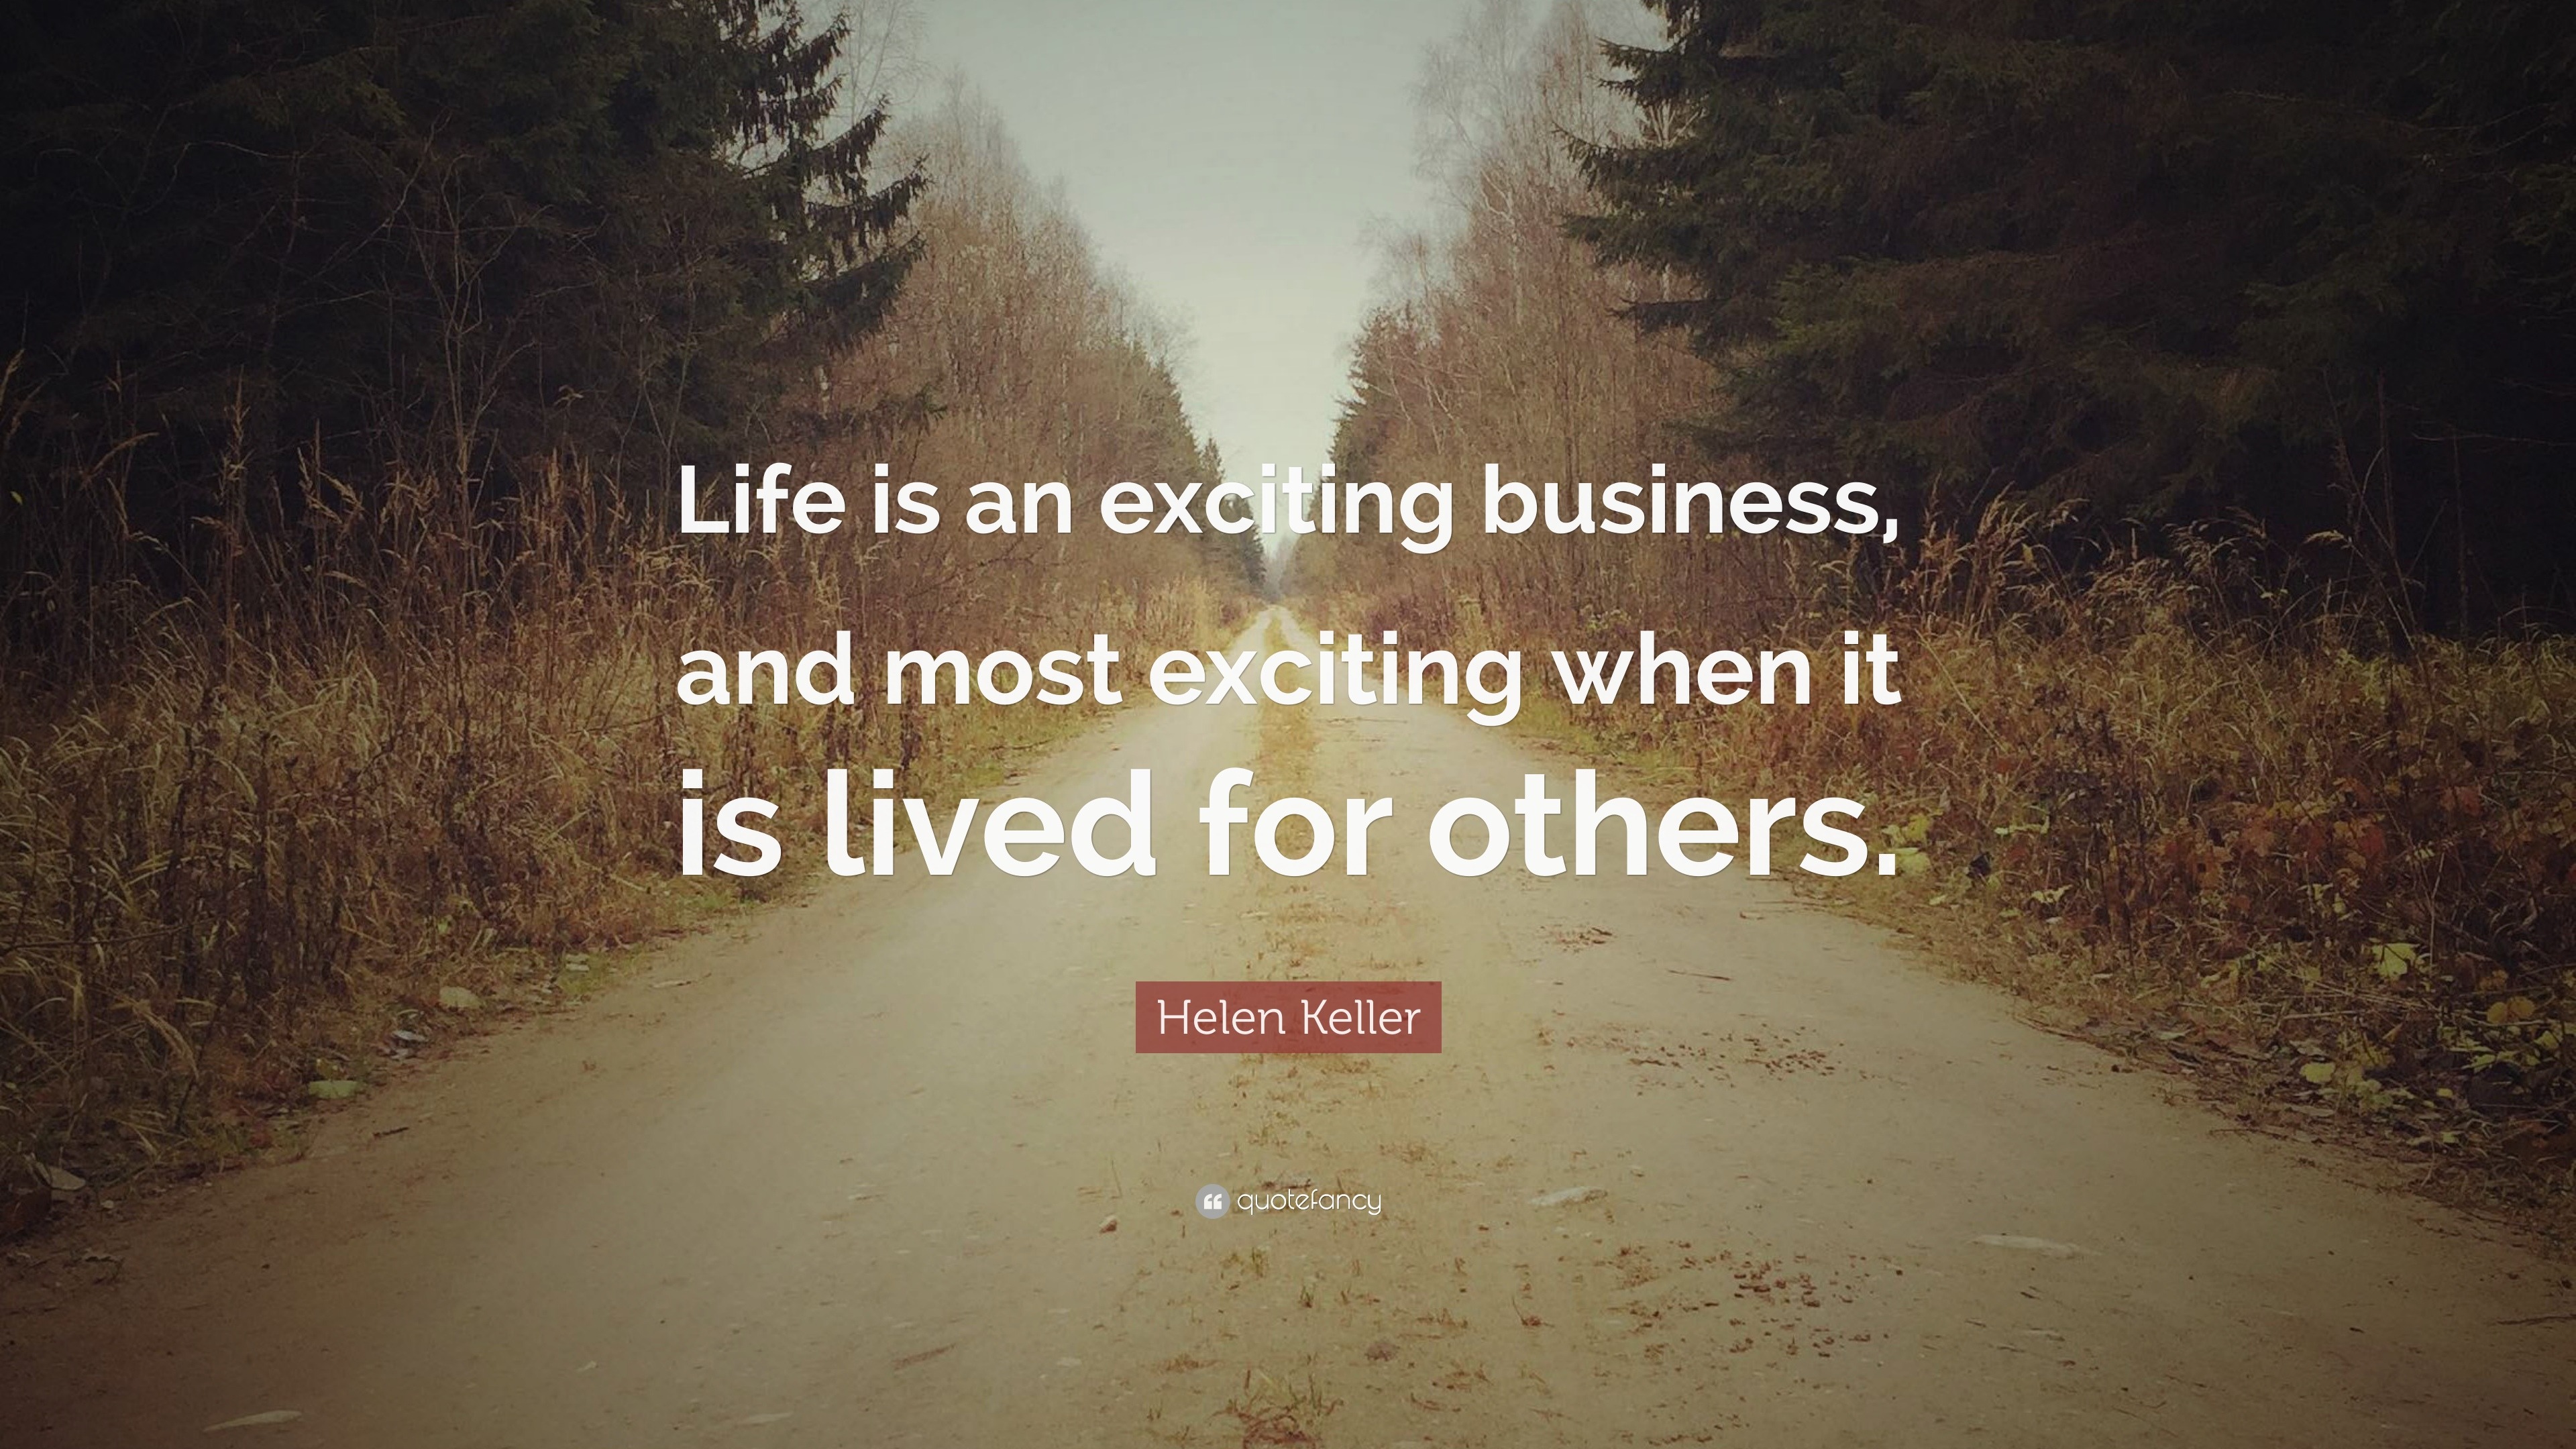 Helen Keller Quote: “Life is an exciting business, and most exciting